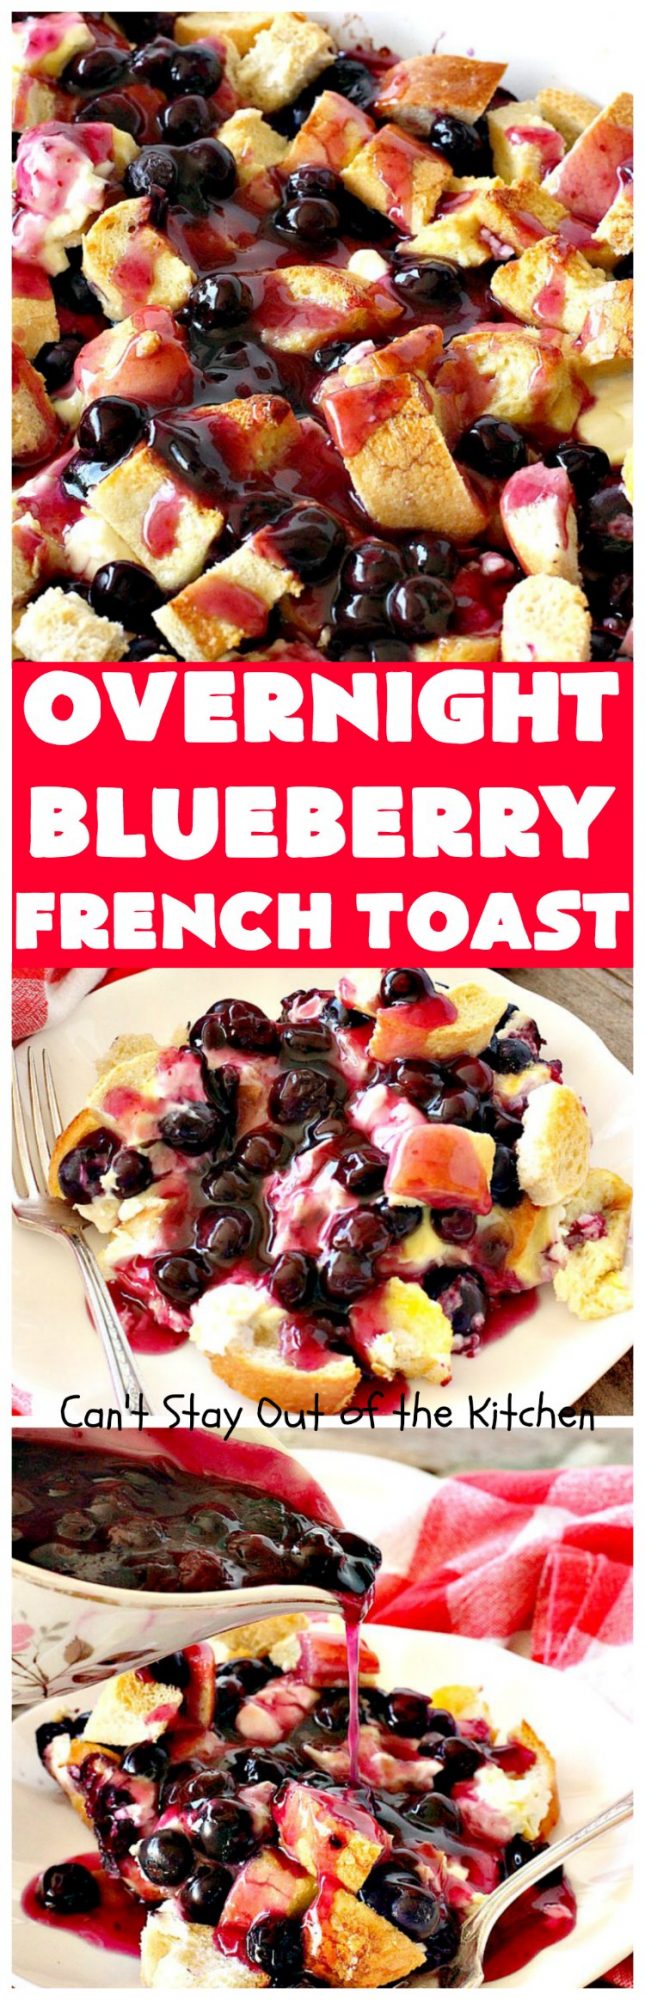 Overnight Blueberry French Toast – Can't Stay Out of the Kitchen